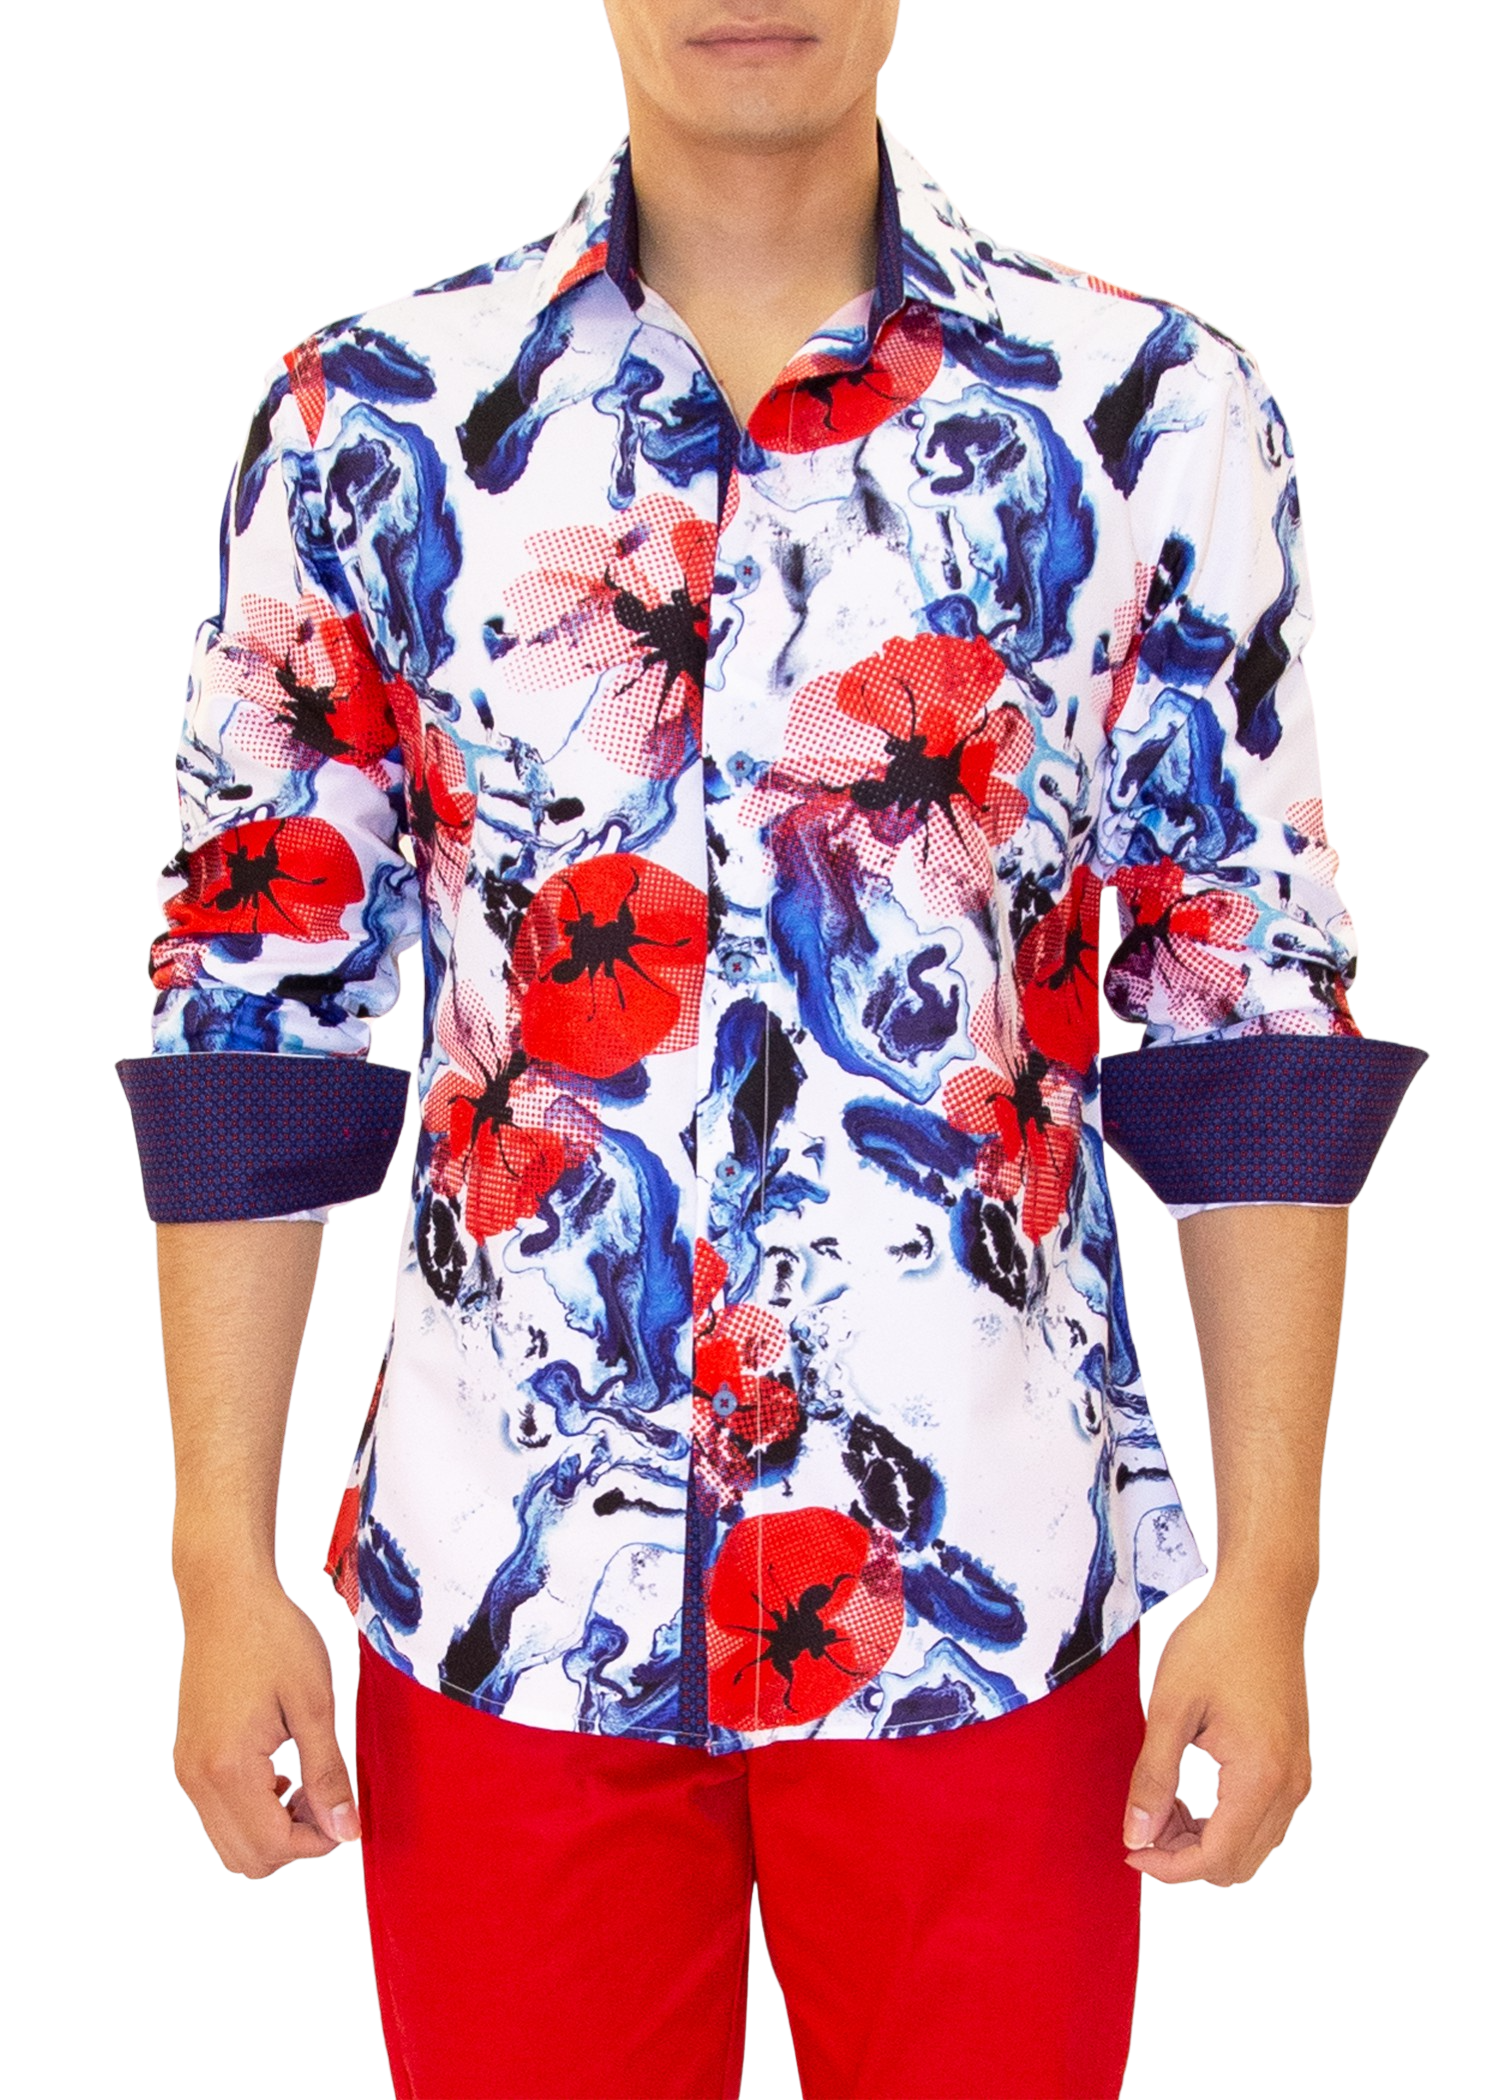 Men's Made to Measure Red Floral Long Sleeve Shirt